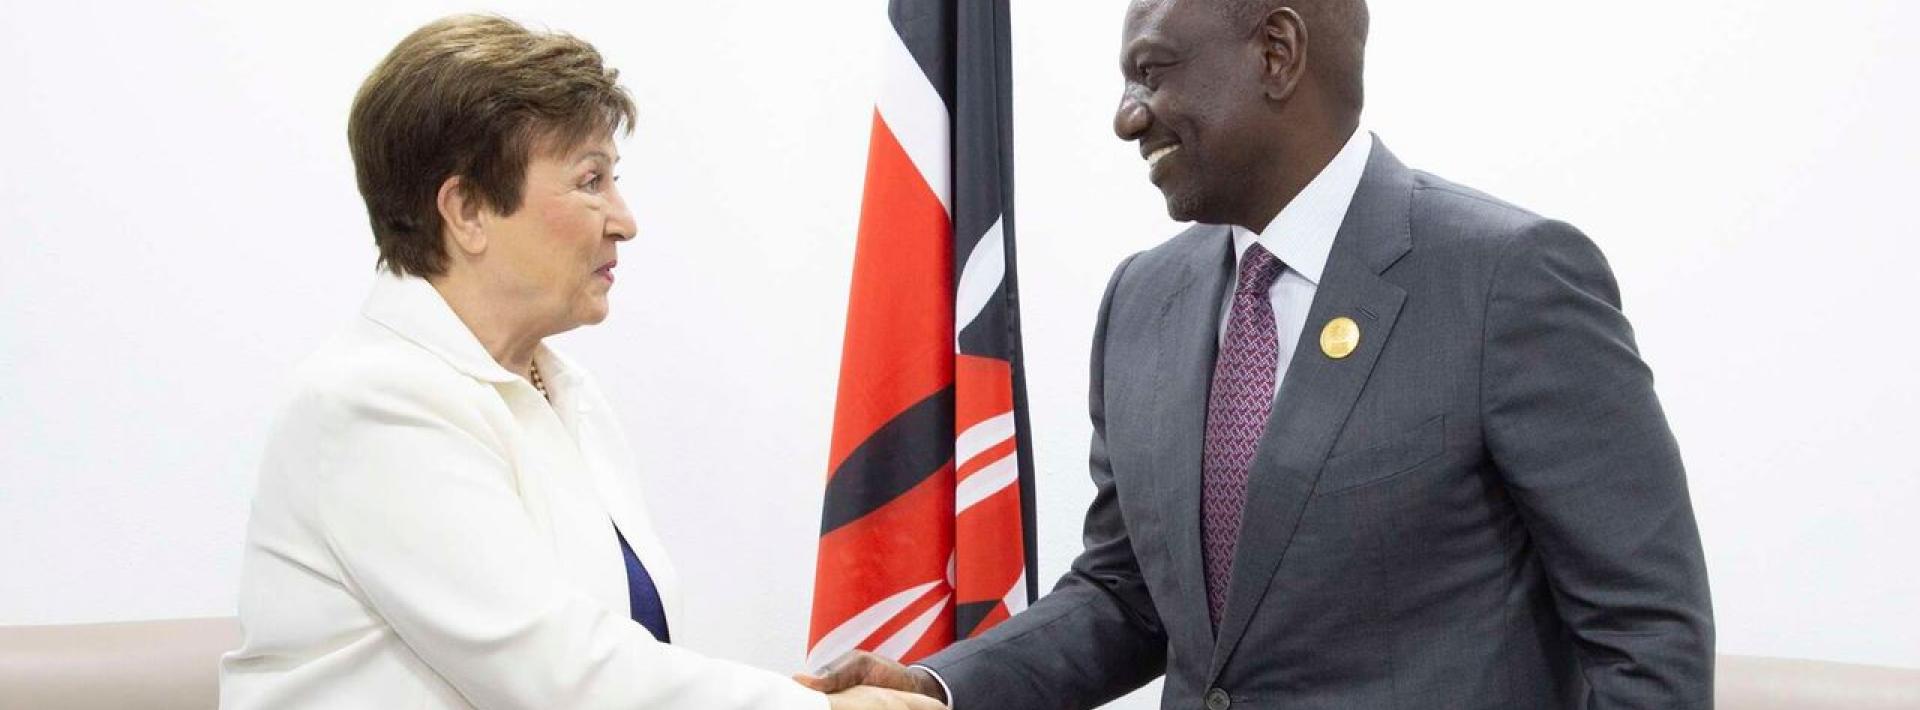 President William Ruto held a meeting with the IMF Managing Director, Kristalina Georgieva on the sidelines of COP27 in Sharma El-Sheikh, Egypt.